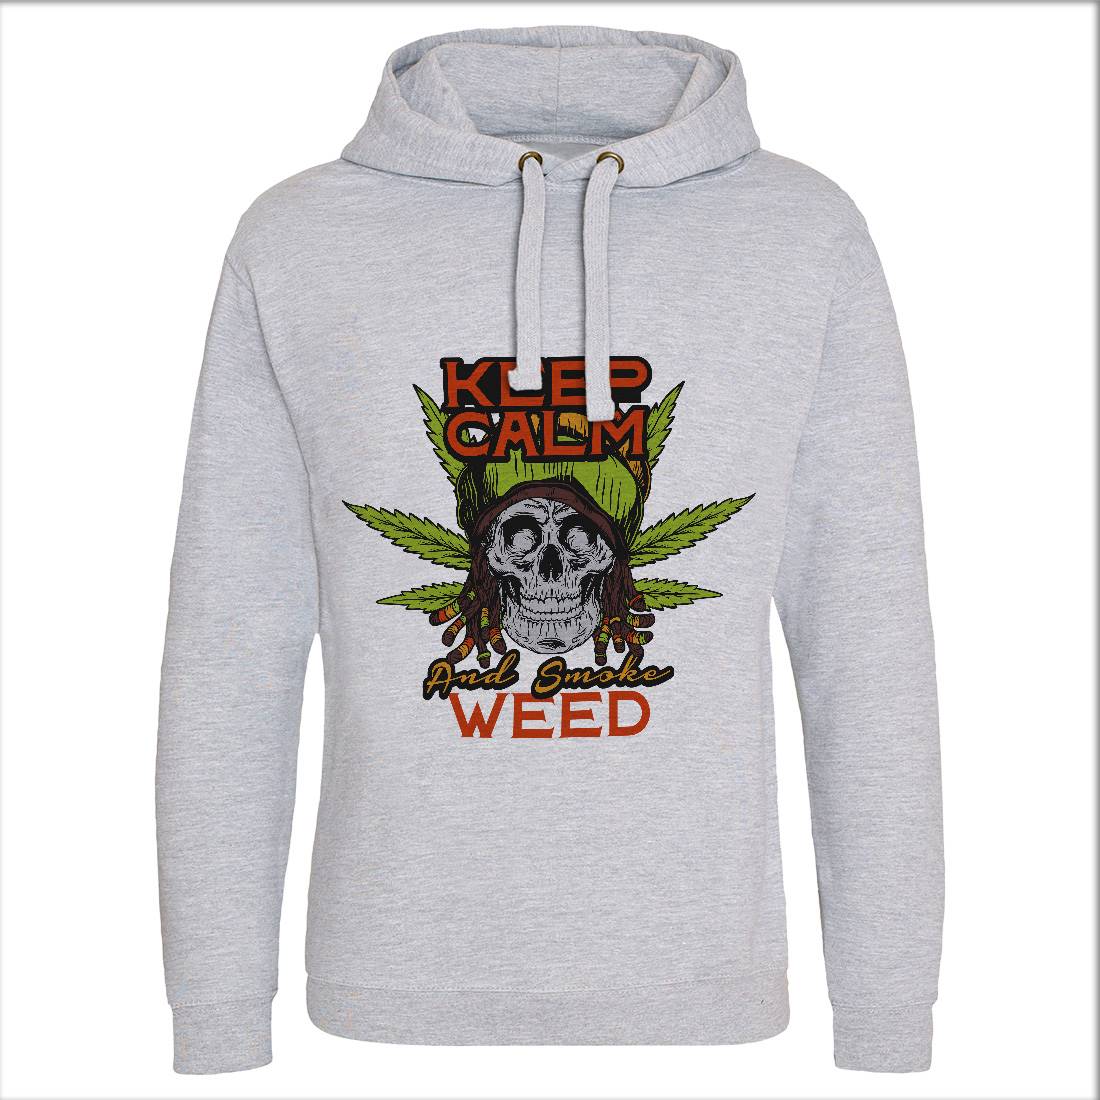 Keep Calm Mens Hoodie Without Pocket Drugs D951